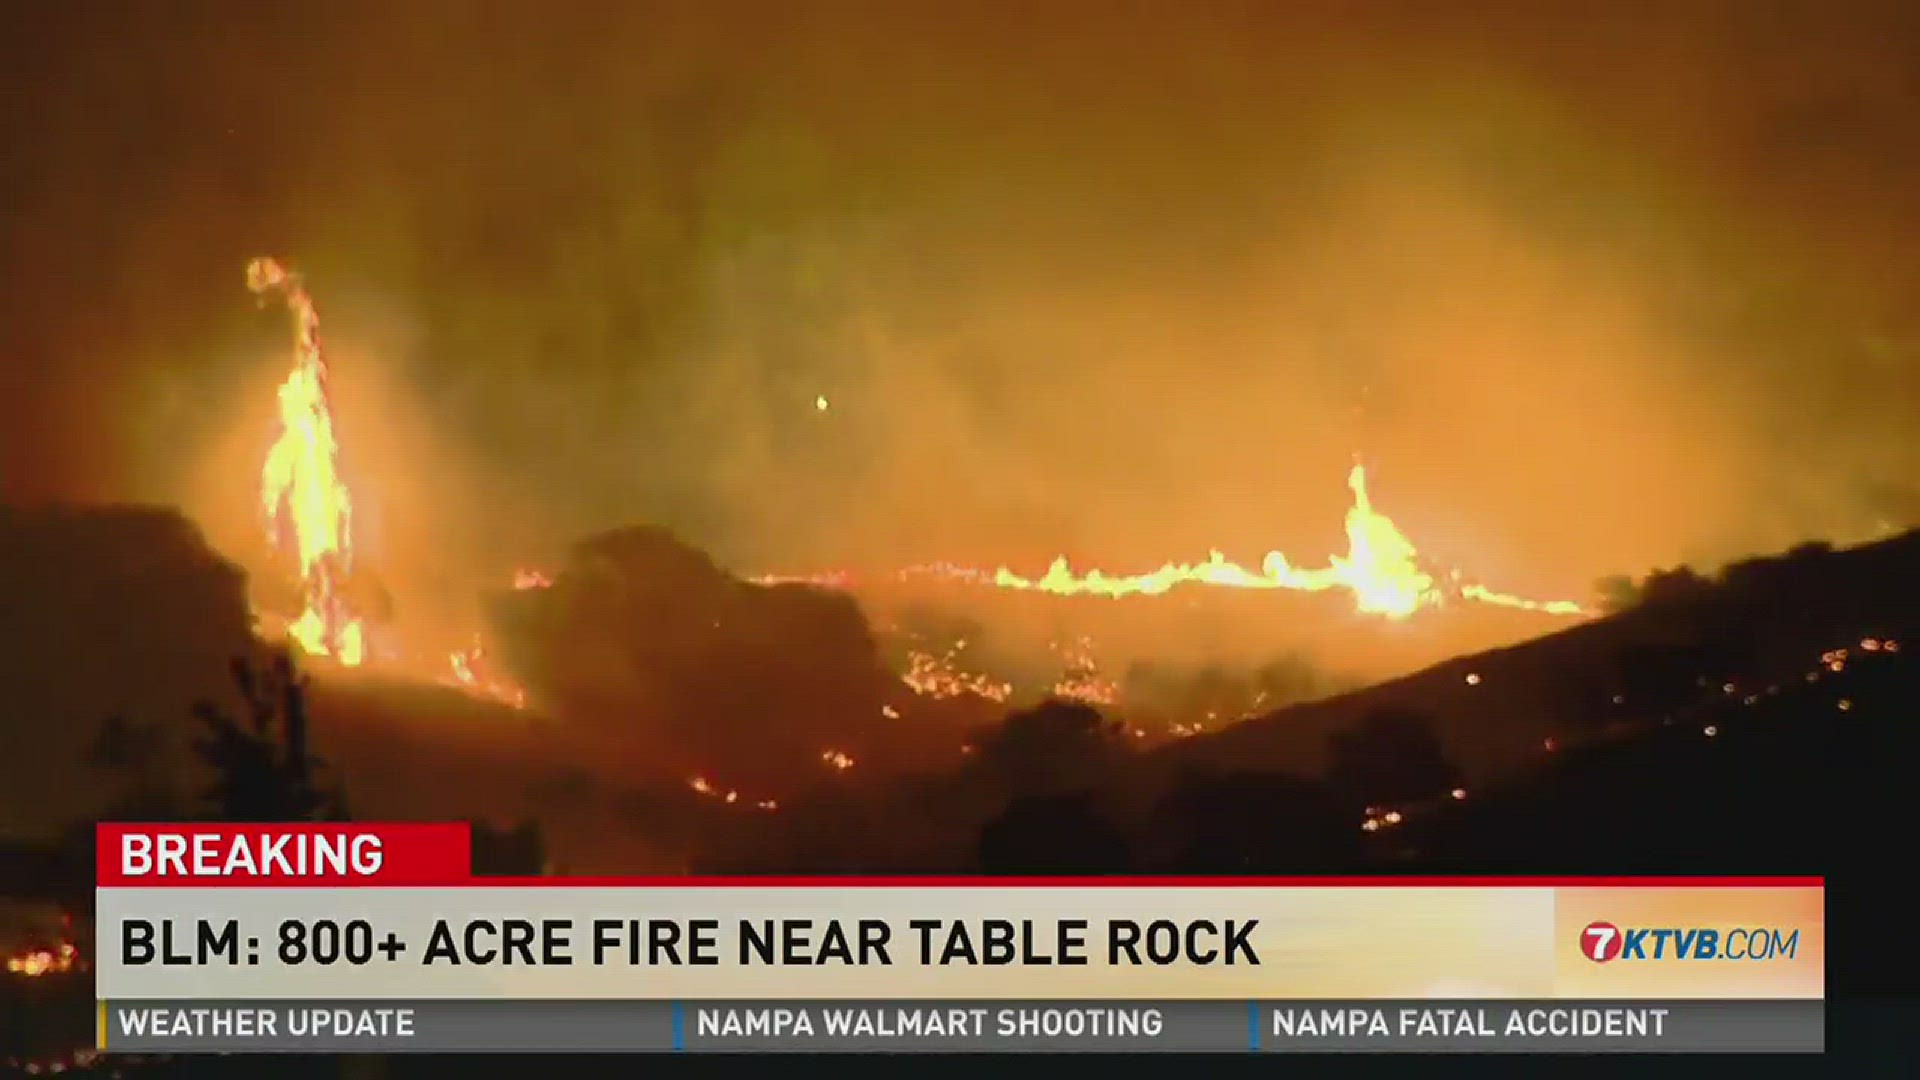 Witness who described start of Table Rock Fire live on TV cited